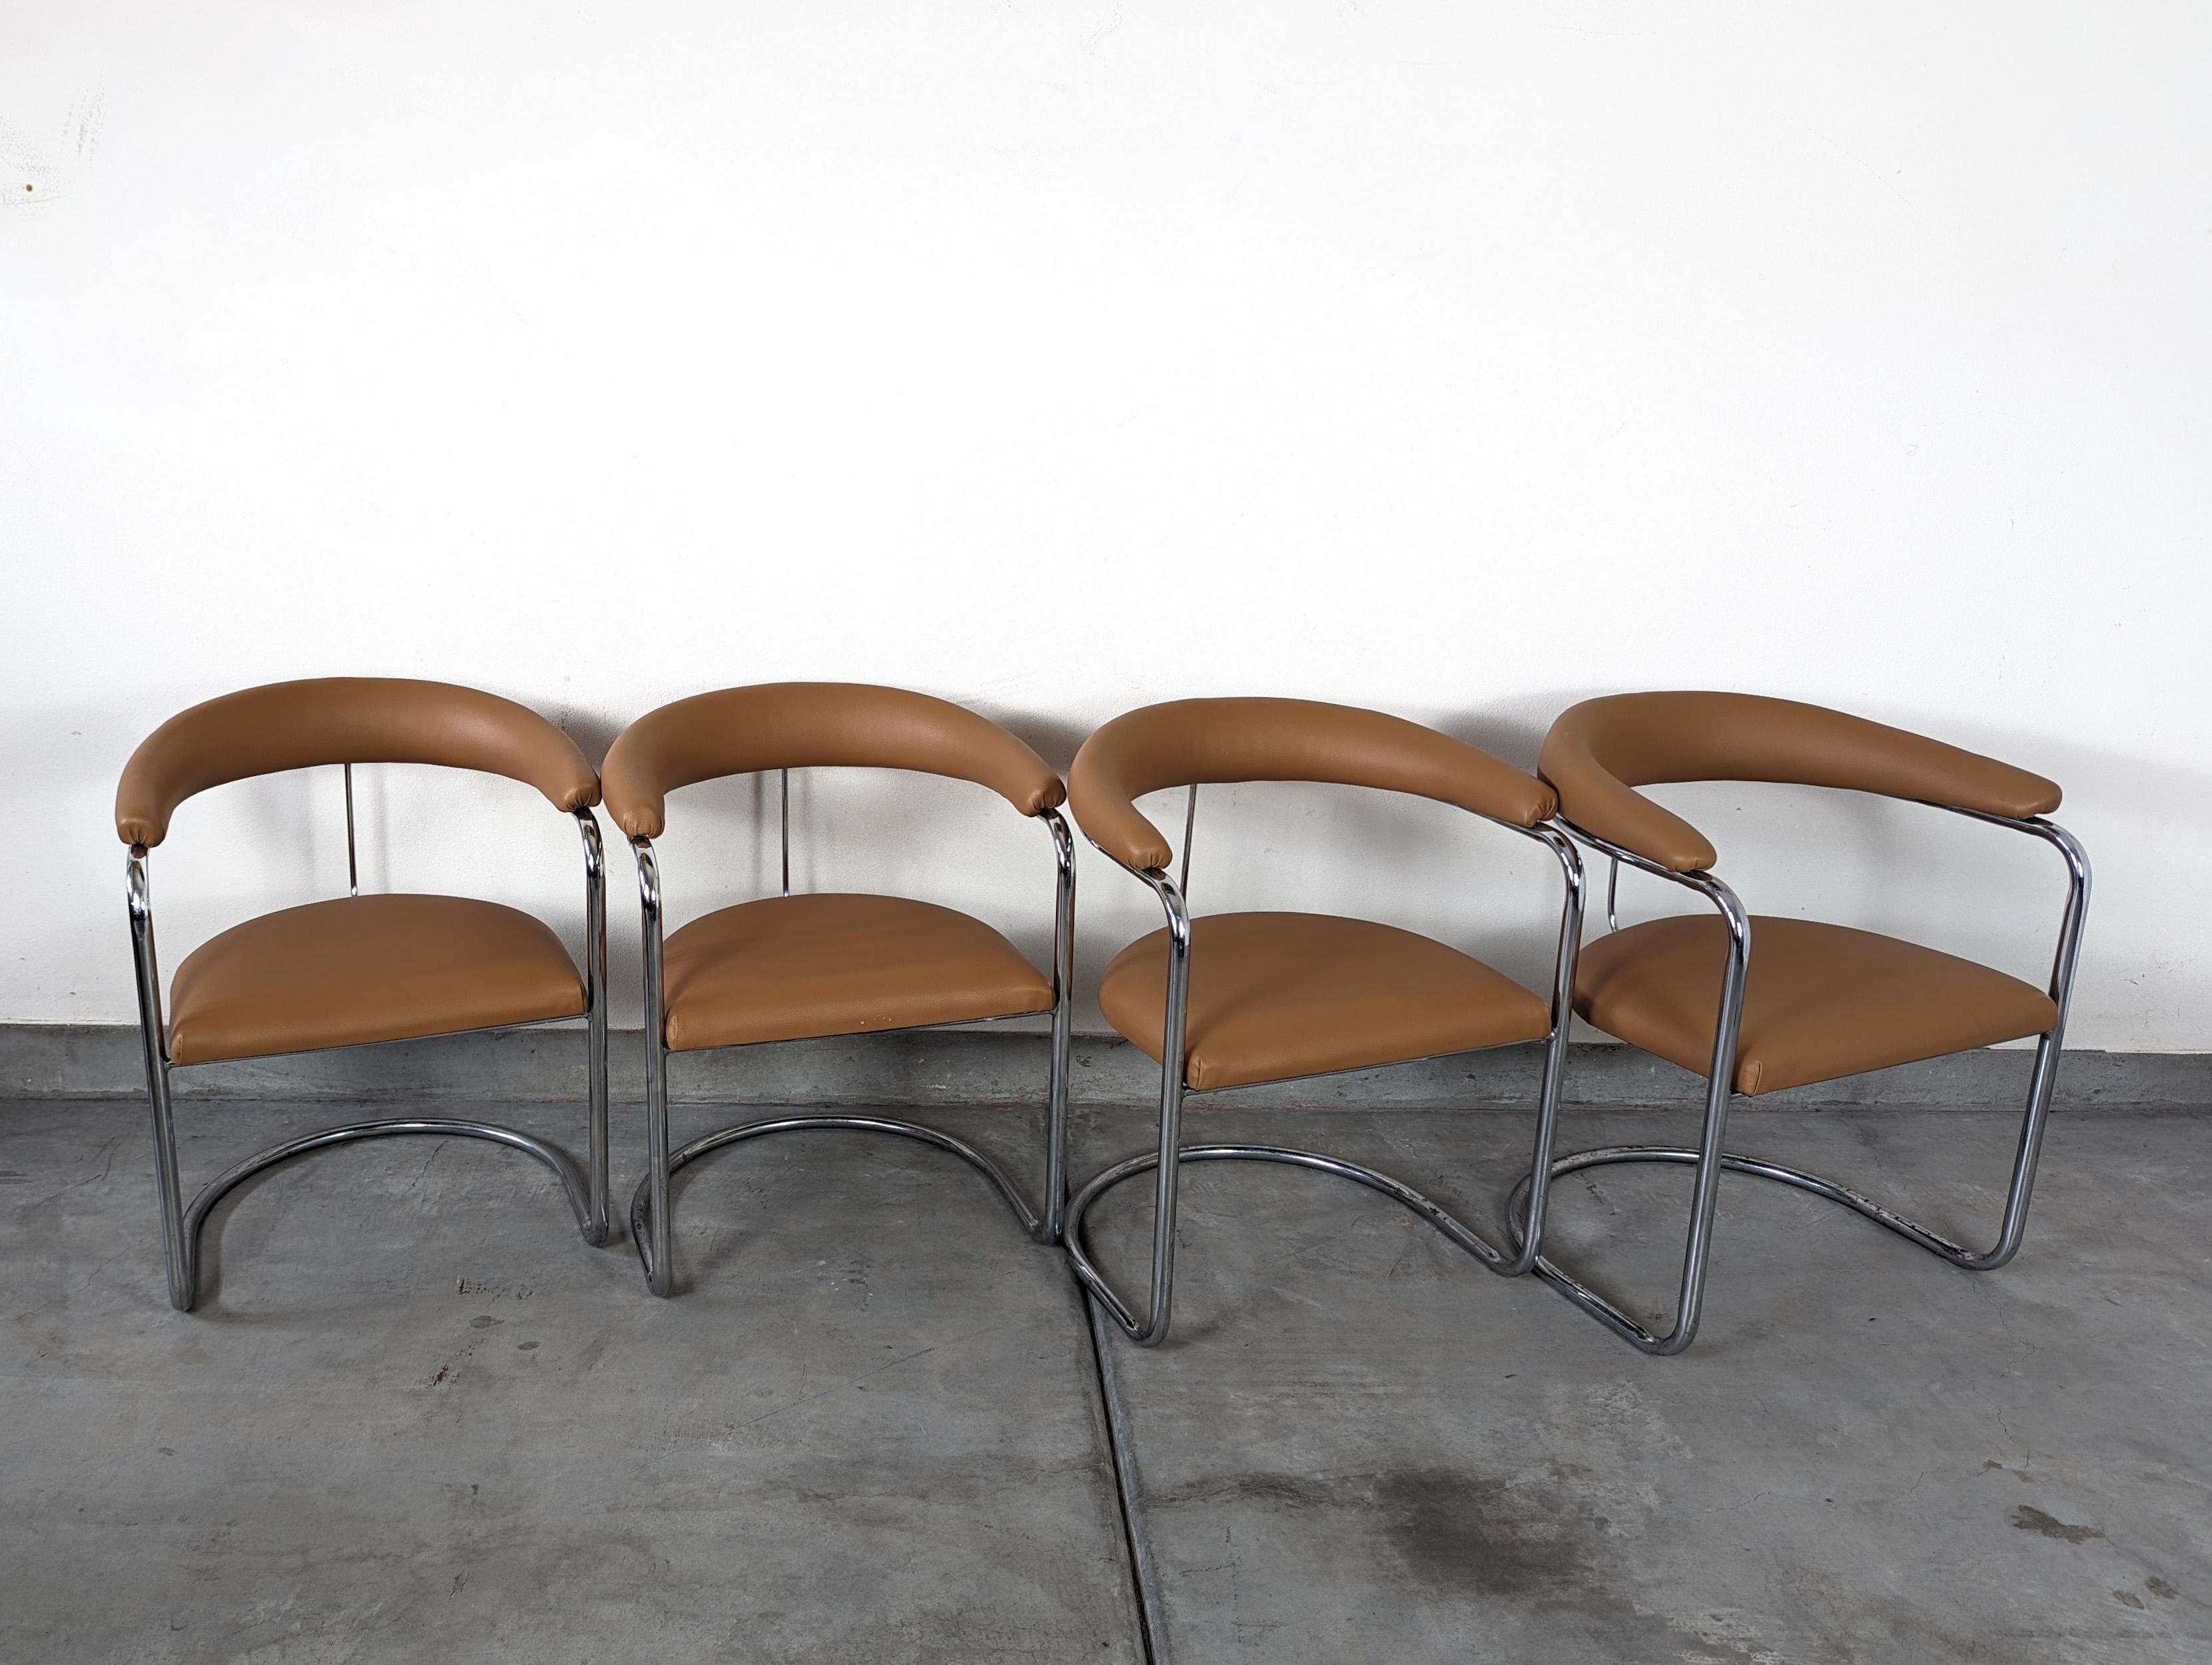 Chrome Mid Century Cantilevered SS33 Armchairs by Anton Lorenz for Thonet, c1970s